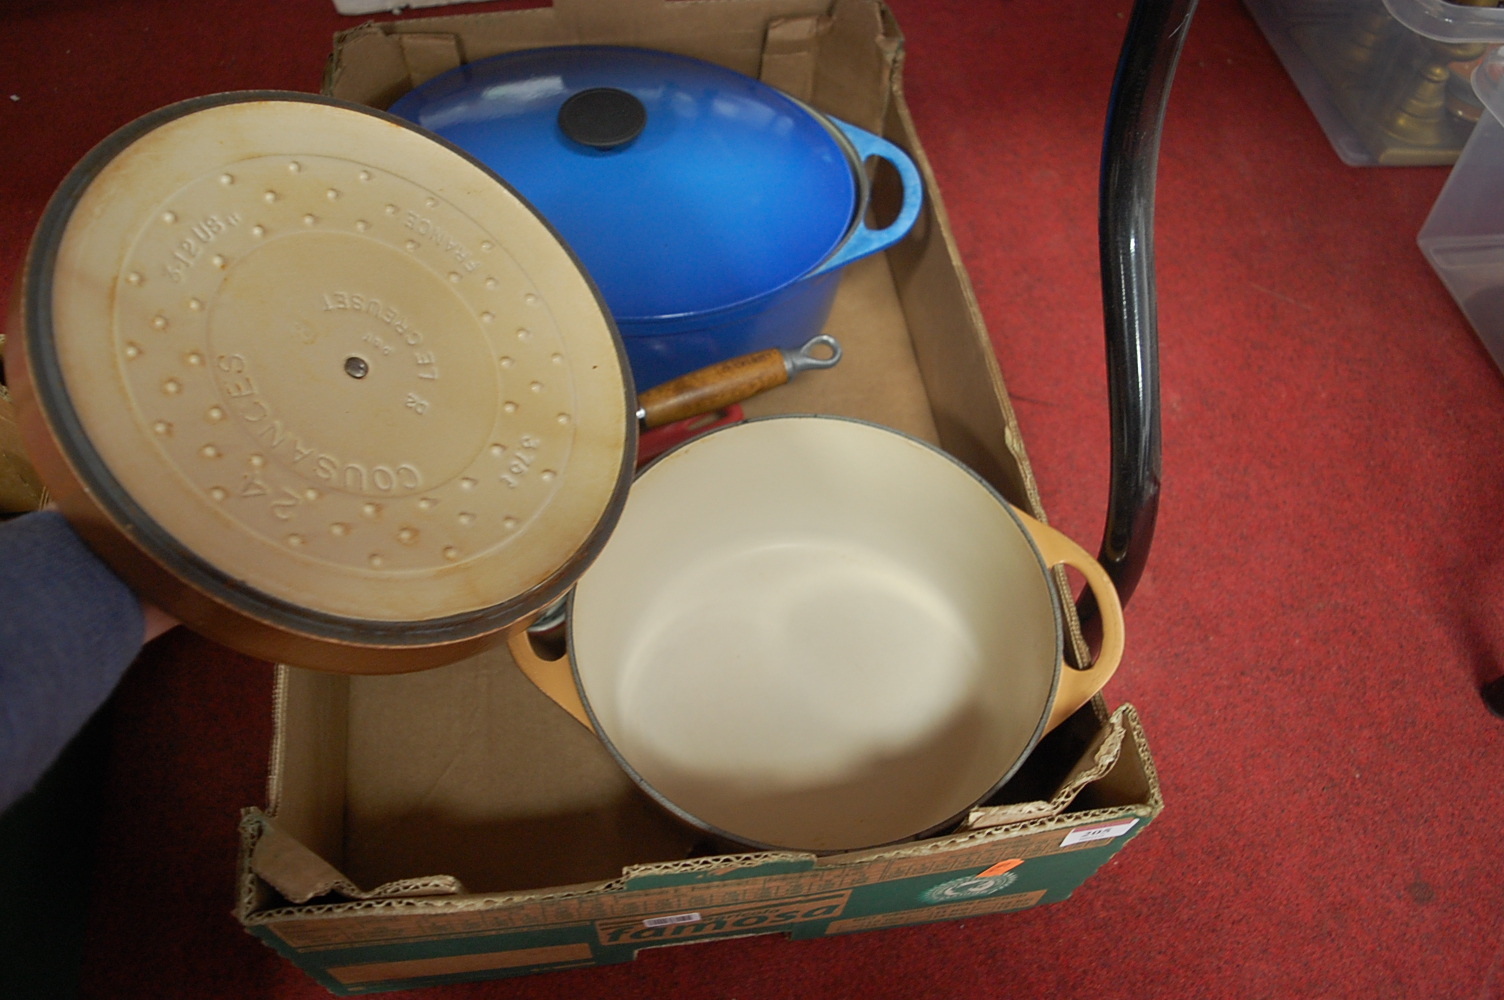 Two boxes of Le Creuset oven wares to include oven dishes, saucepans etc - Image 4 of 6